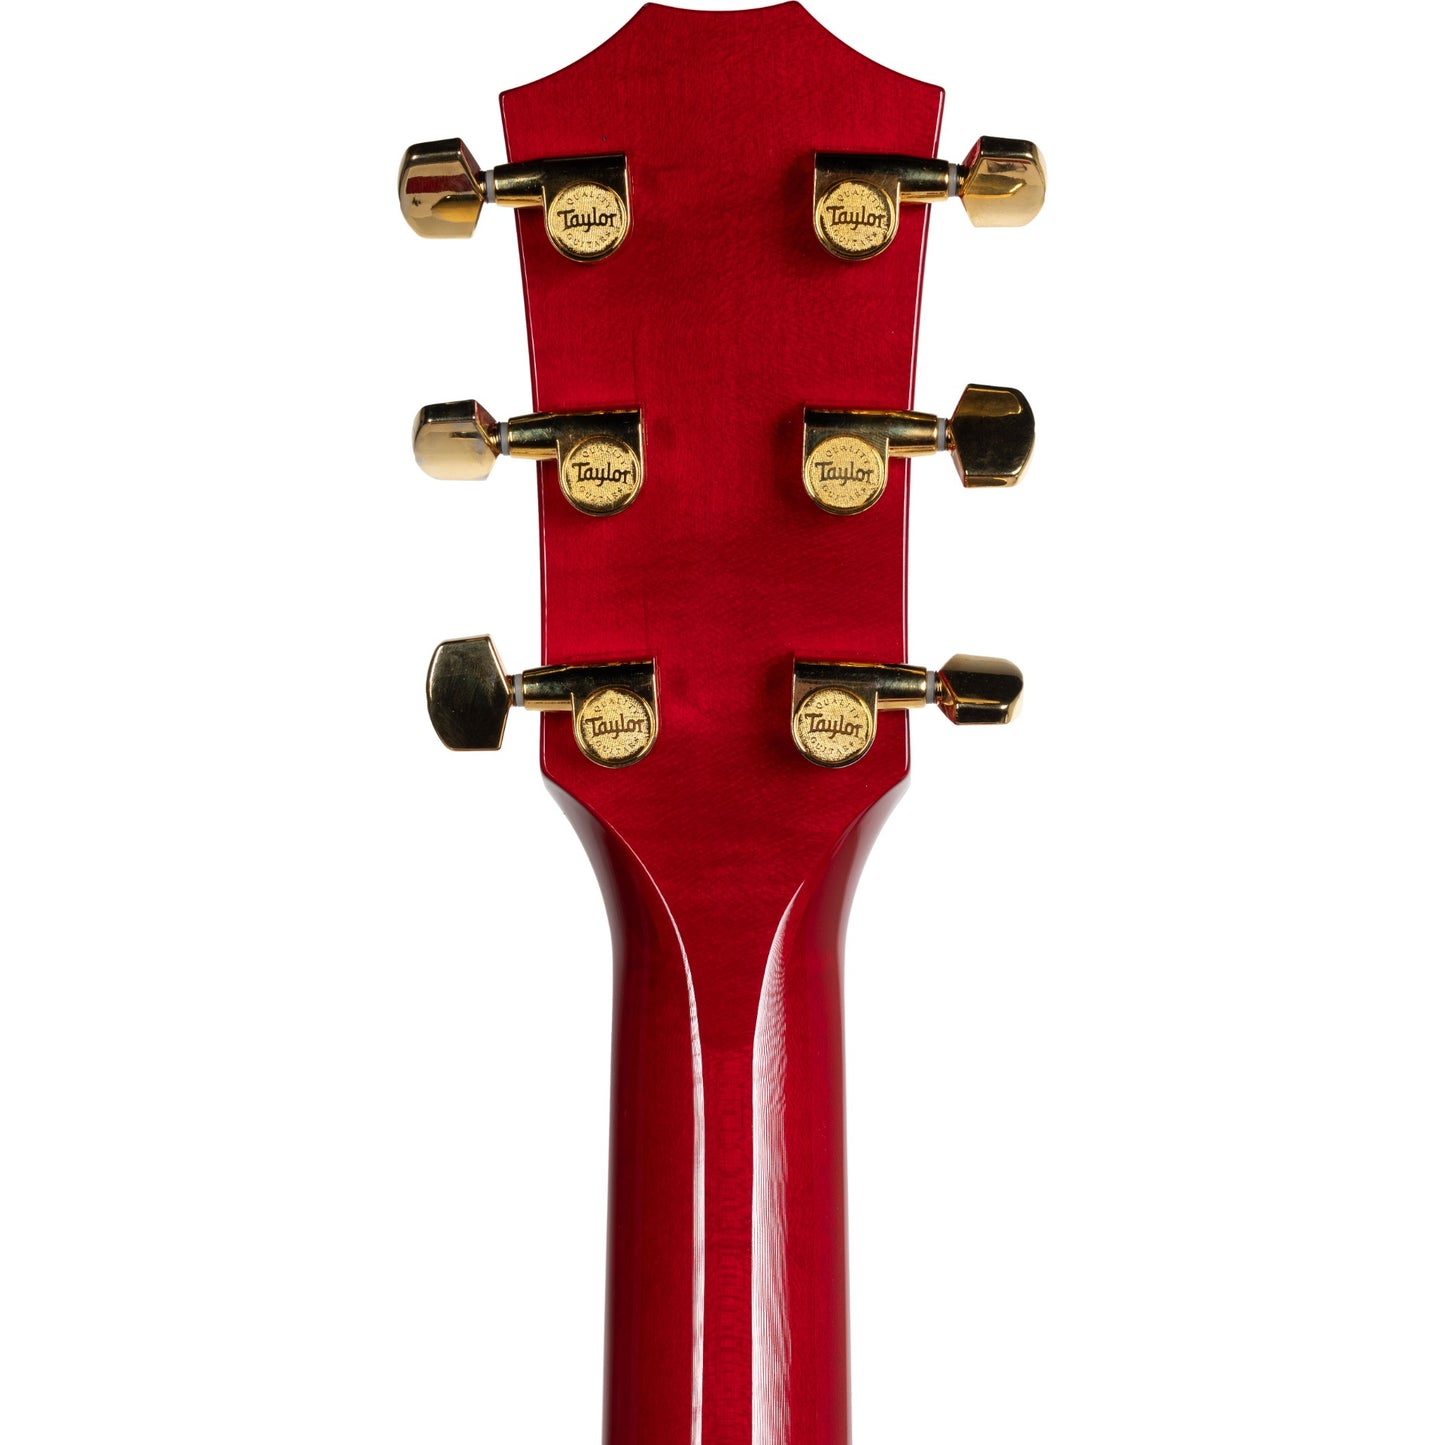 Taylor 614ce Special Edition Acoustic Electric Guitar - Trans Red